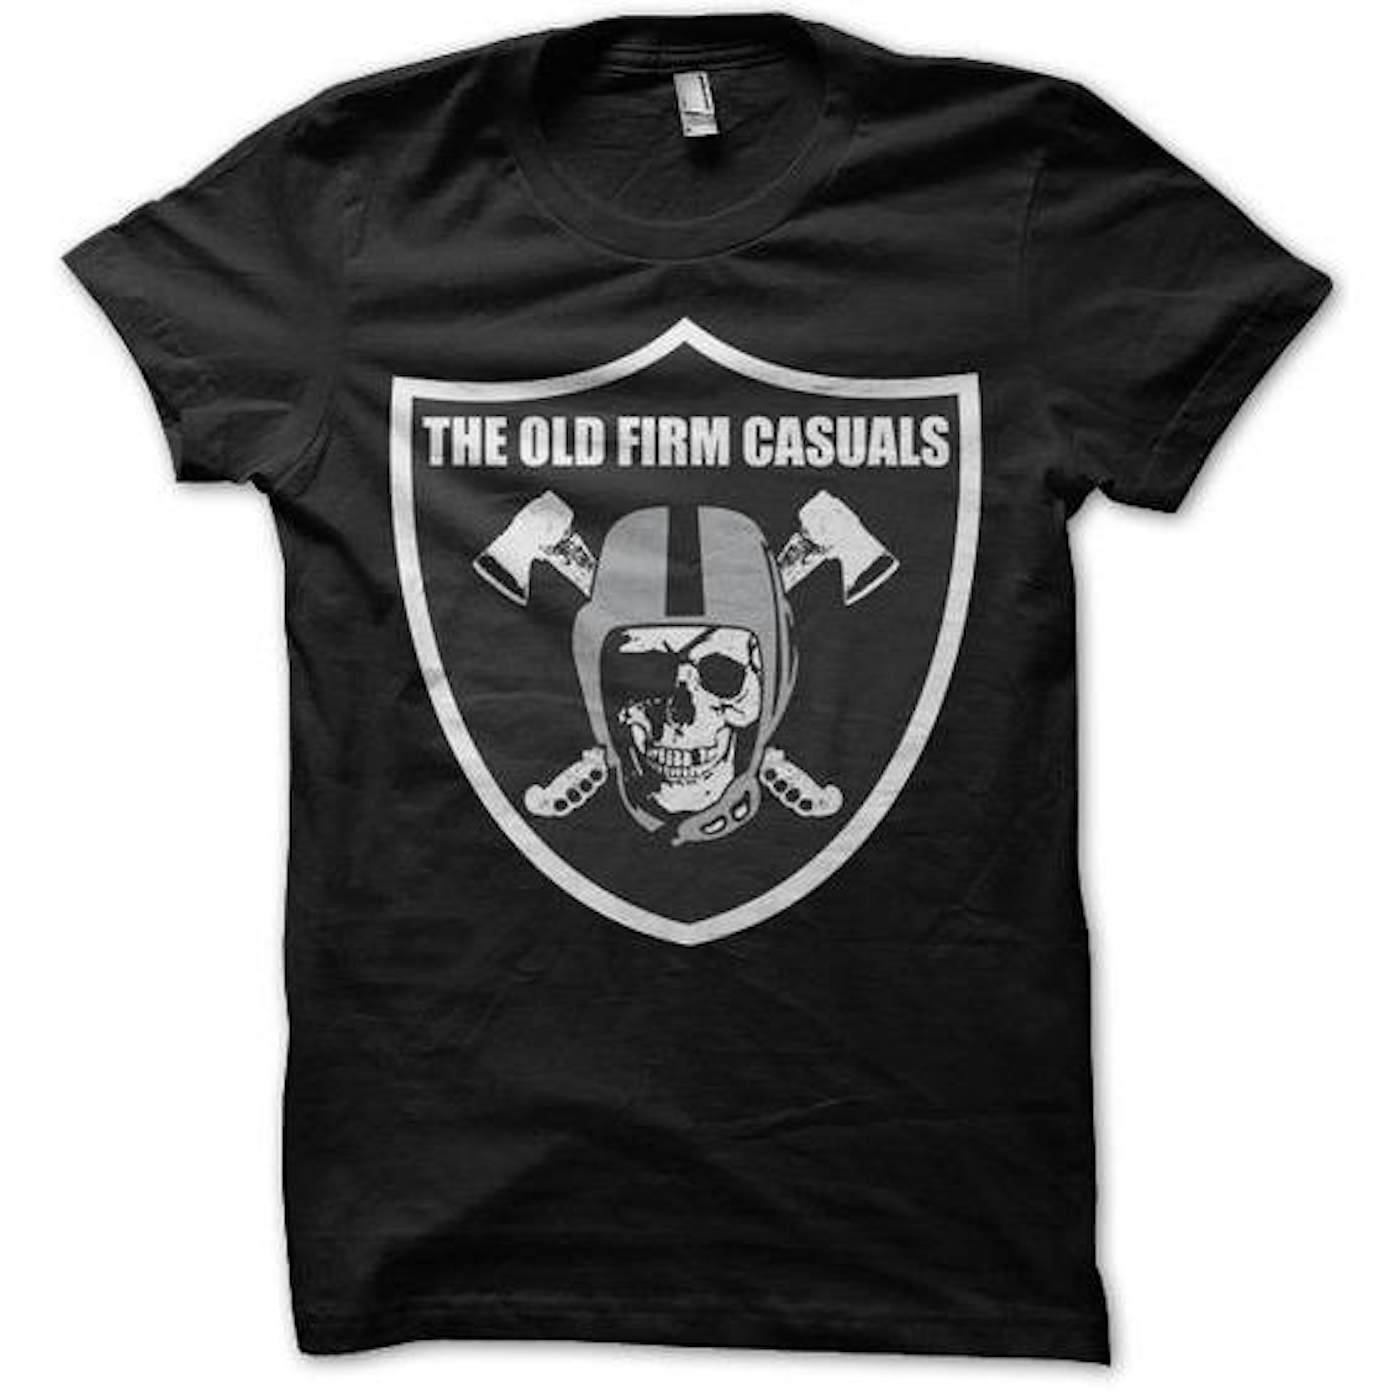 The Old Firm Casuals - Raiders - T-Shirt